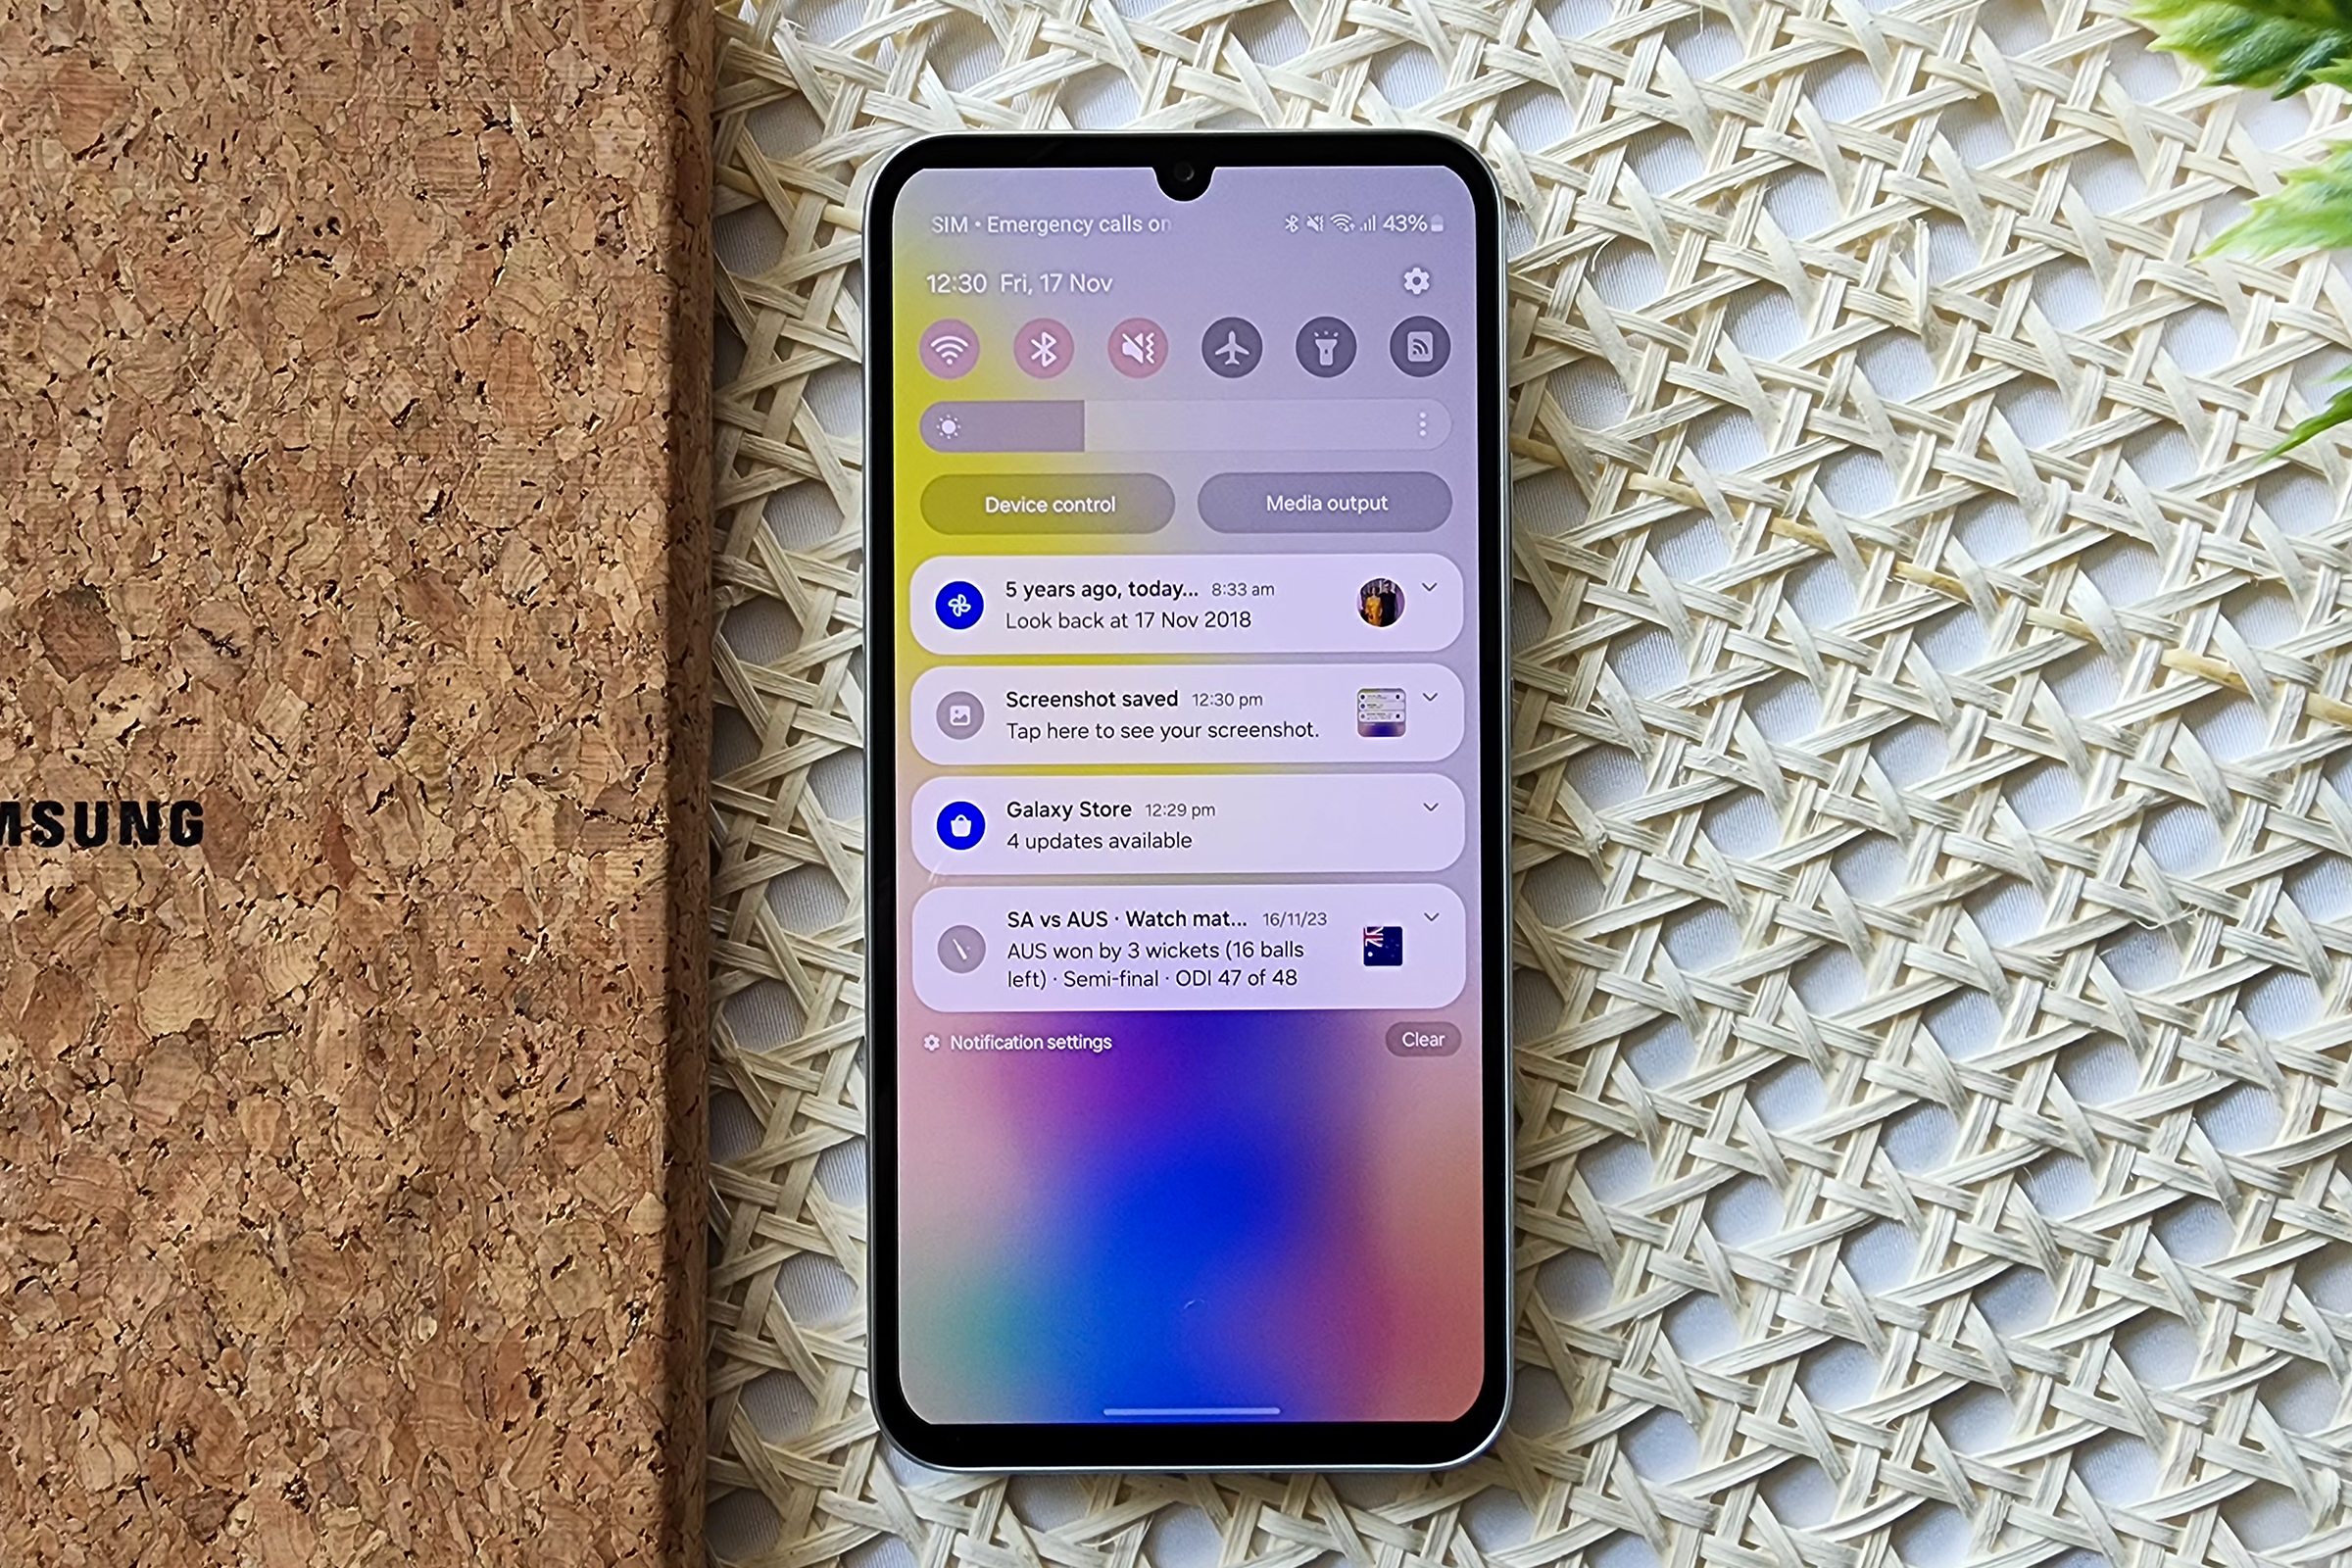 Samsung's One UI 6 Update Gives Galaxy Phones More AI Camera Smarts - CNET